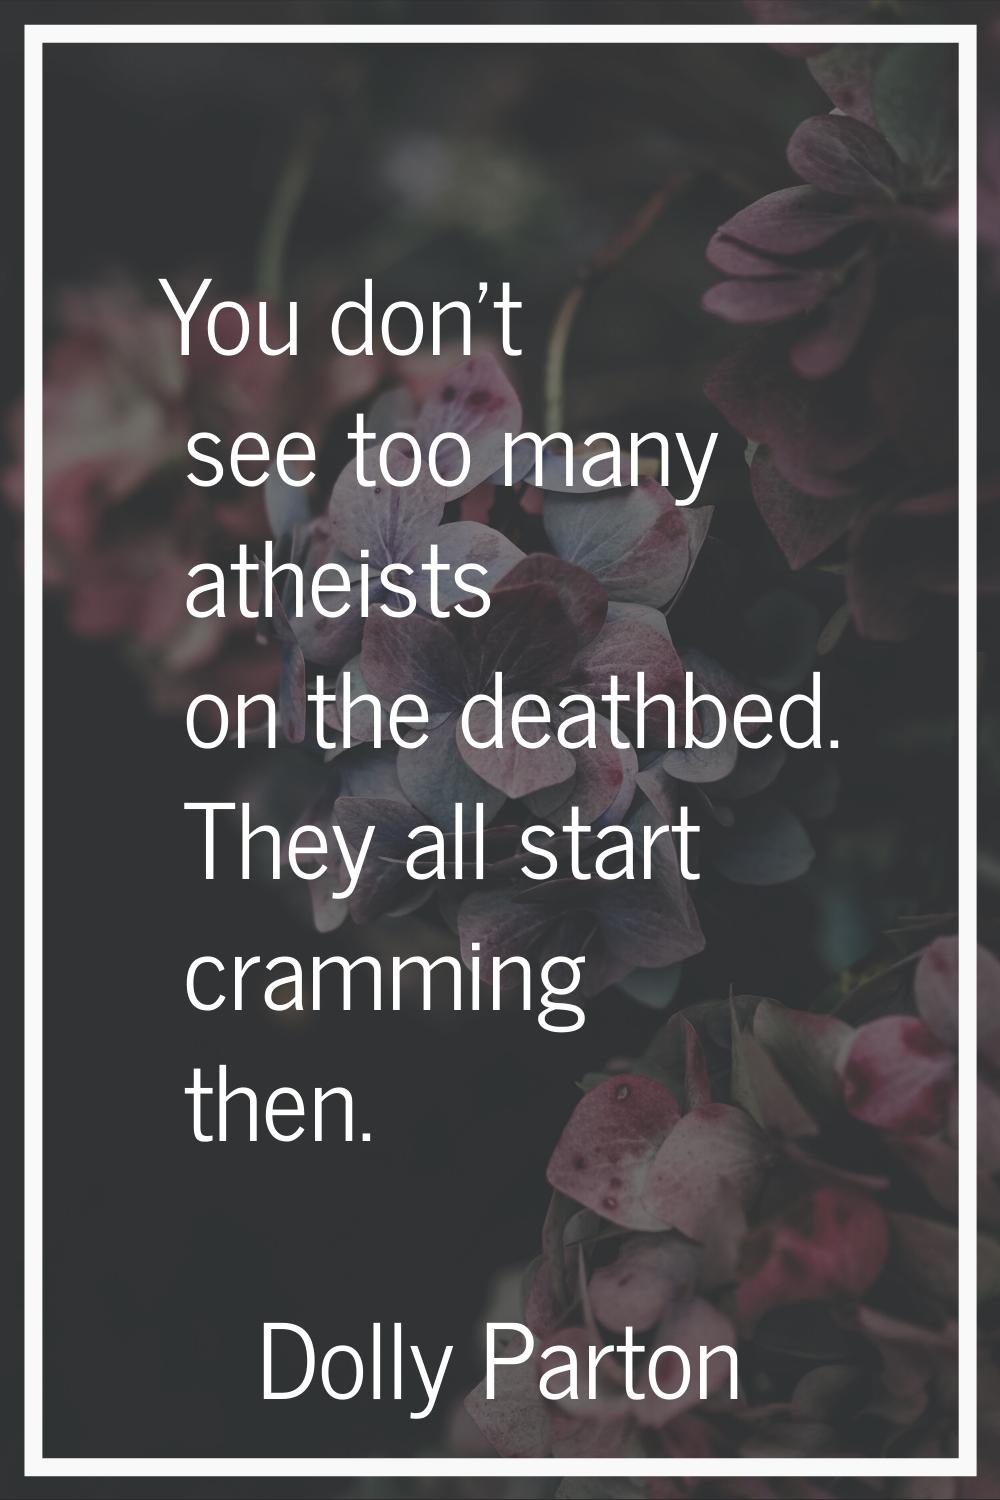 You don't see too many atheists on the deathbed. They all start cramming then.